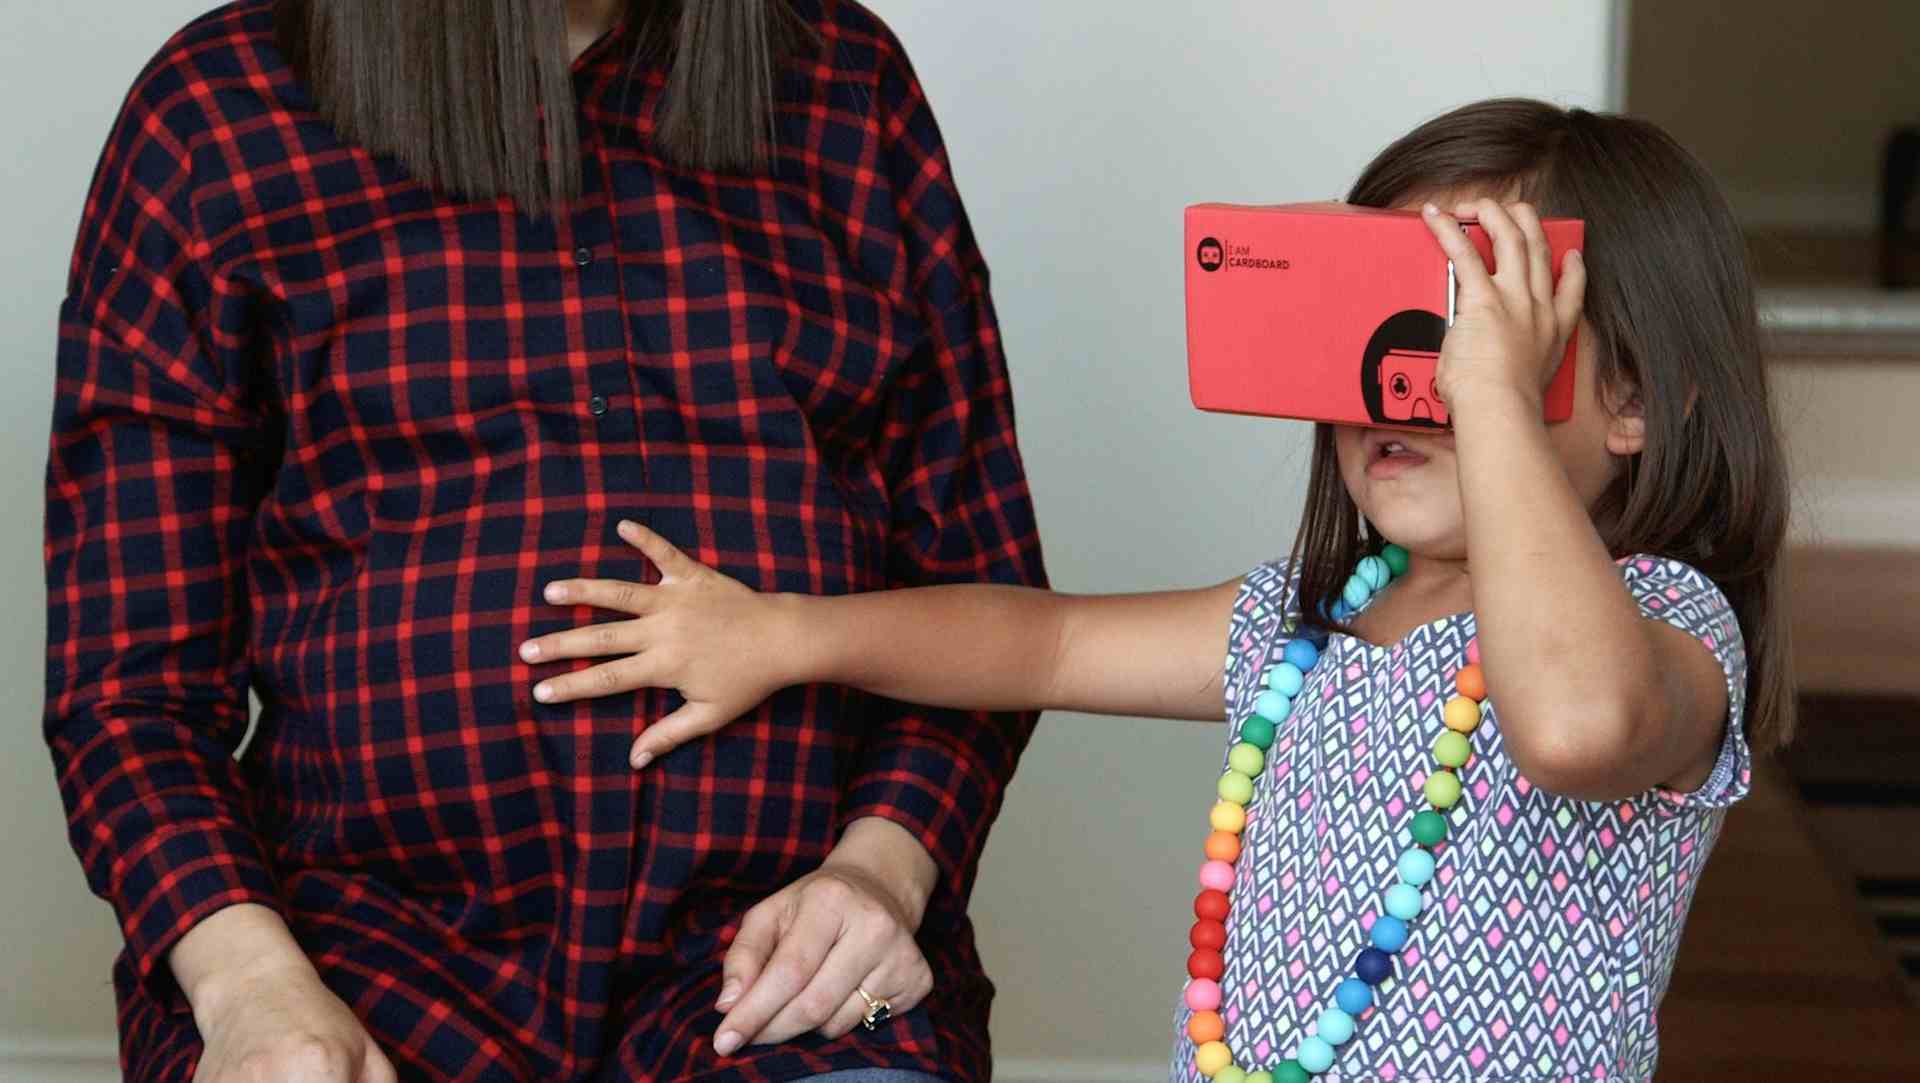 Mother and child with VR glasses on